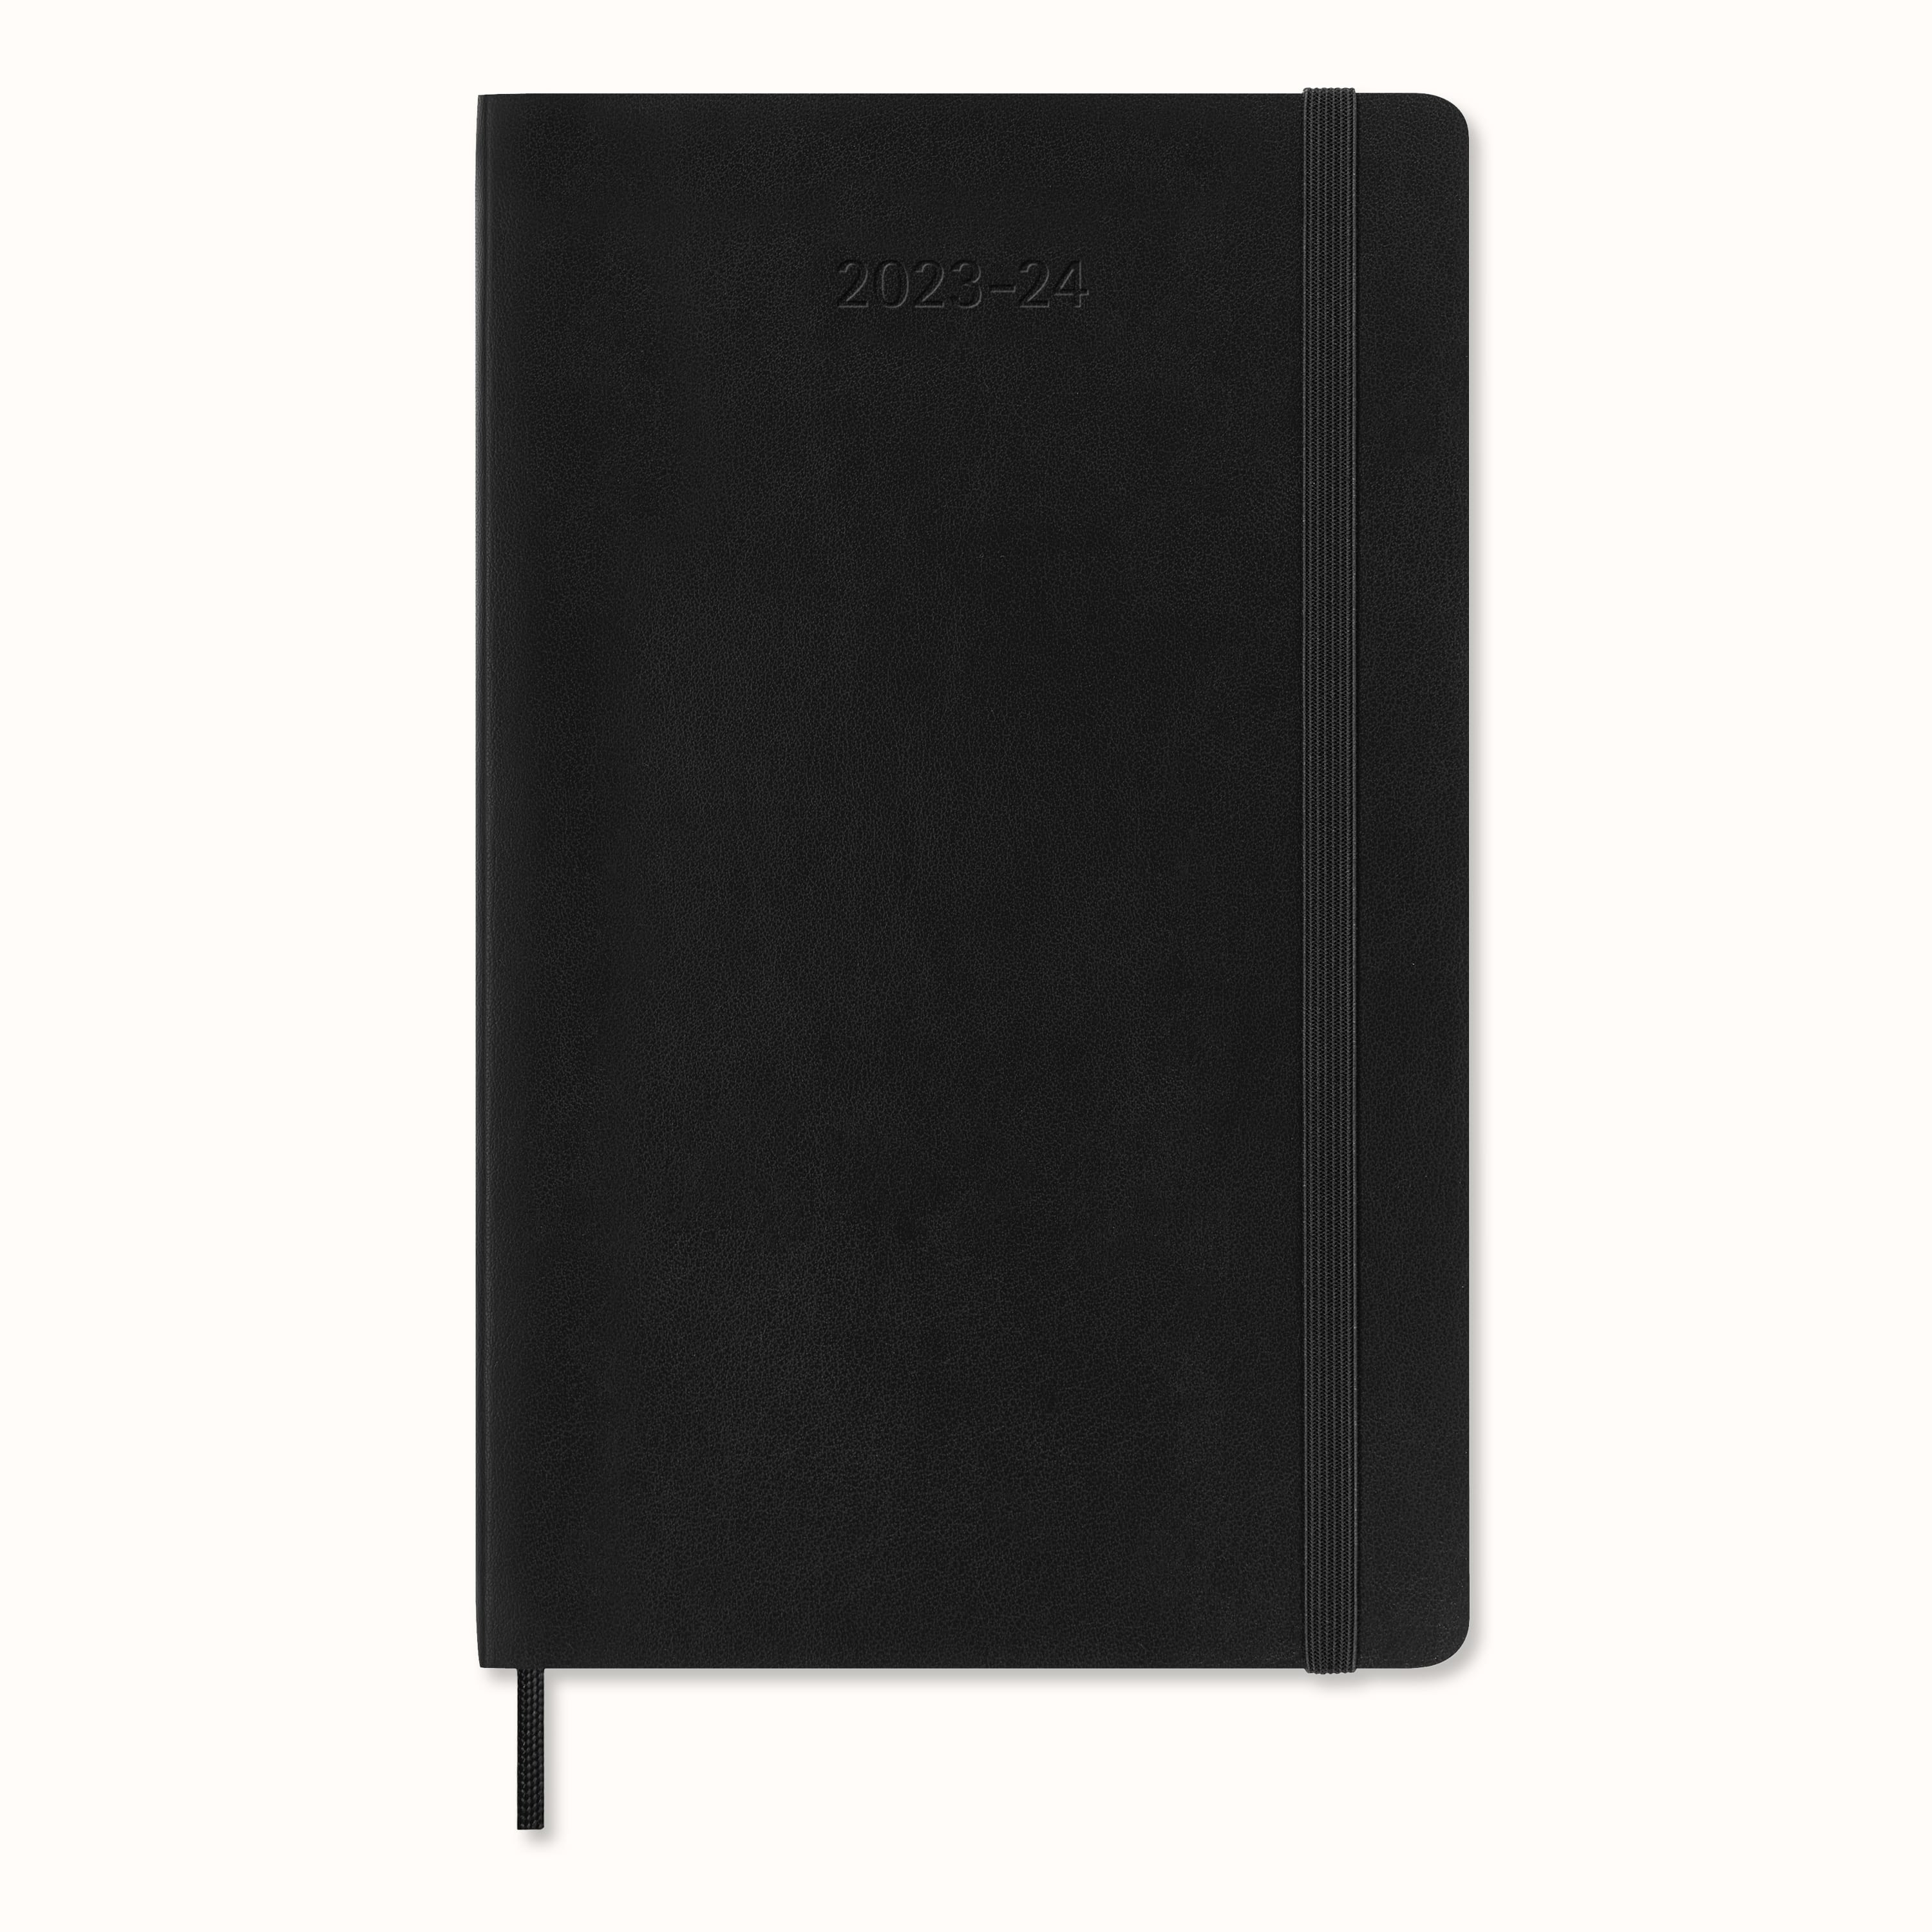 Moleskine 2023 / 2024 Diary 18-month Daily 13 X 21cm Large